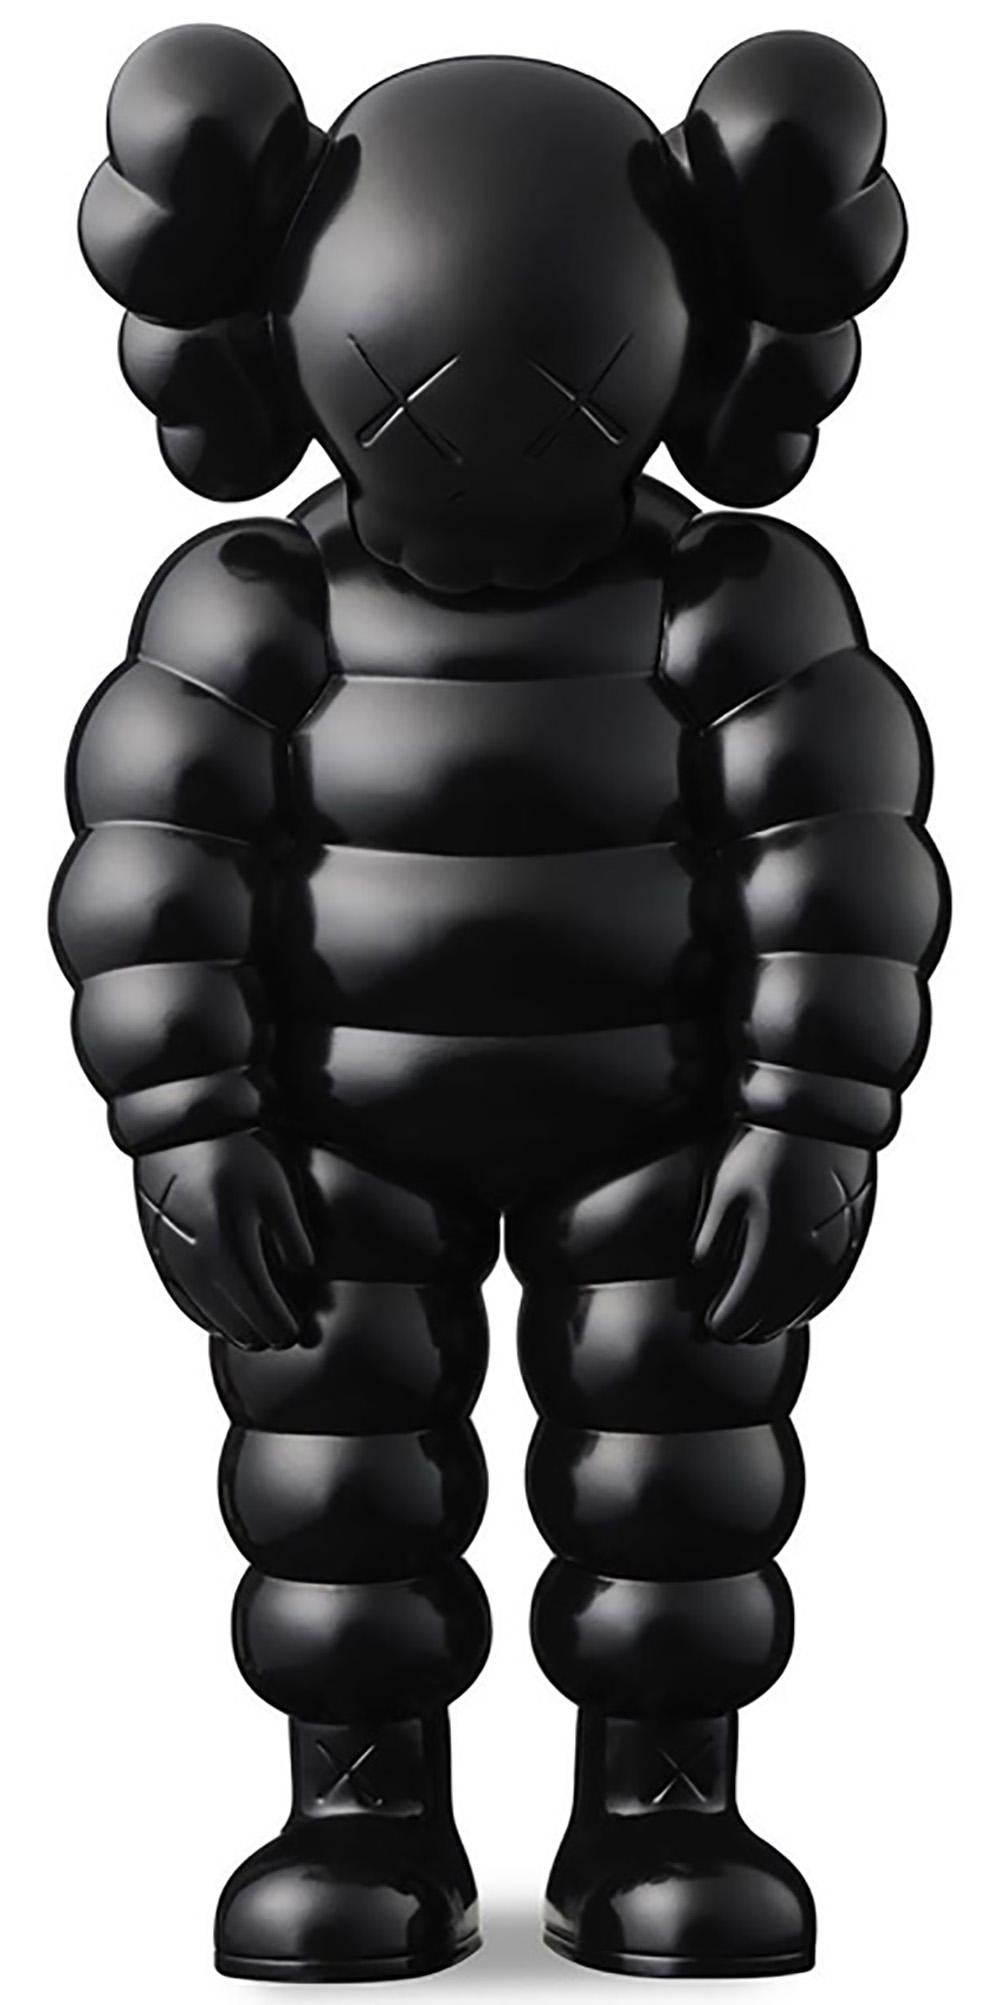 KAWS WHAT PARTY Black: 
This KAWS Companion vinyl sculpture features KAWS' signature CHUM character in a sloping position. Published to commemorate the debut of KAWS’ larger scale sculptural version of same at K11 Musea Hong Kong. New in original